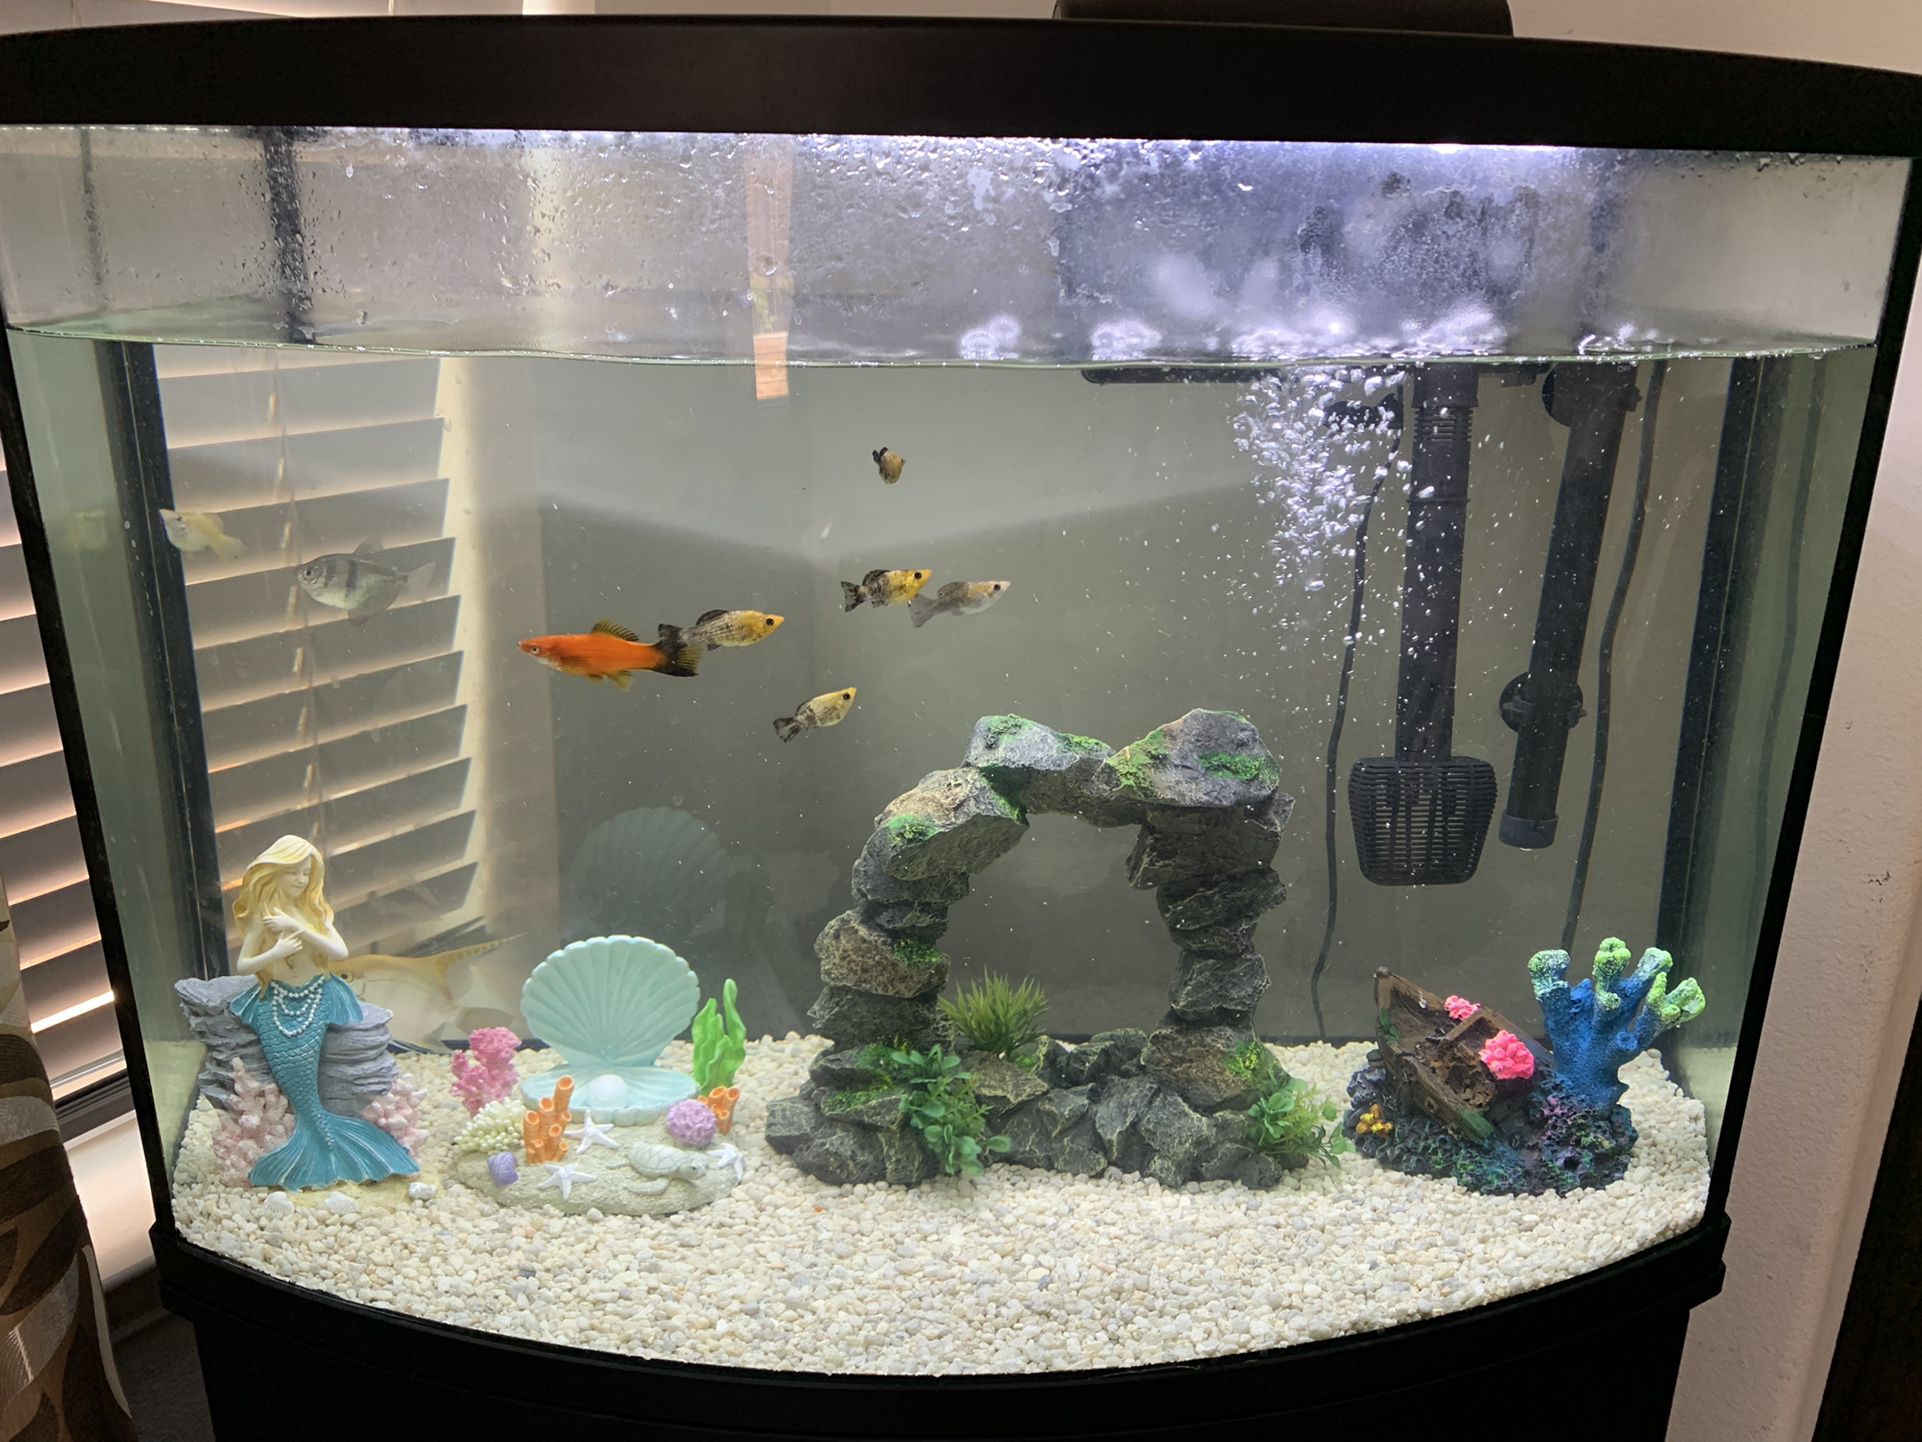 36 Gallons Curved Glass Fish Aquarium For Sale With Filter and Heater $175